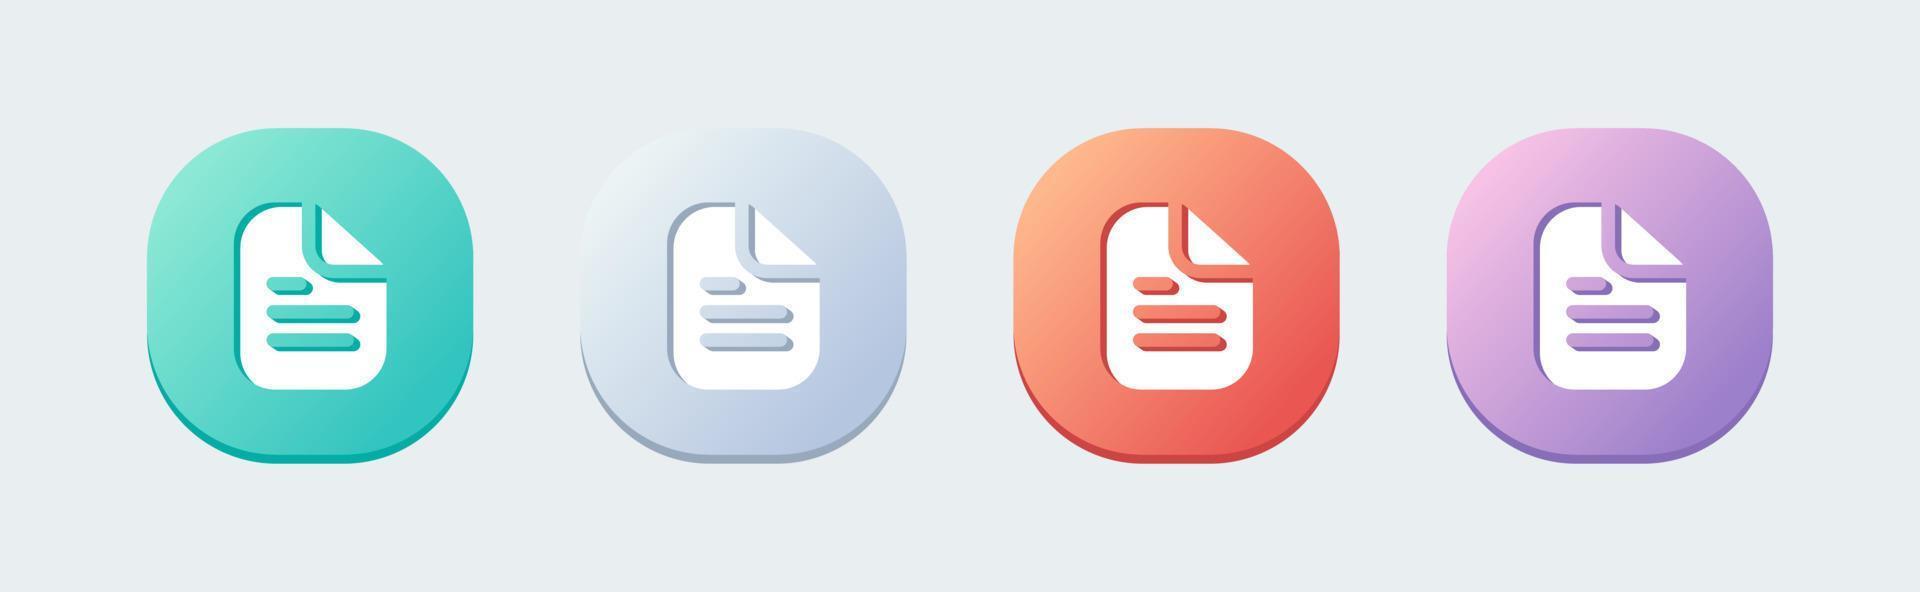 Document solid icon in flat design style. Folded written paper vector icon.